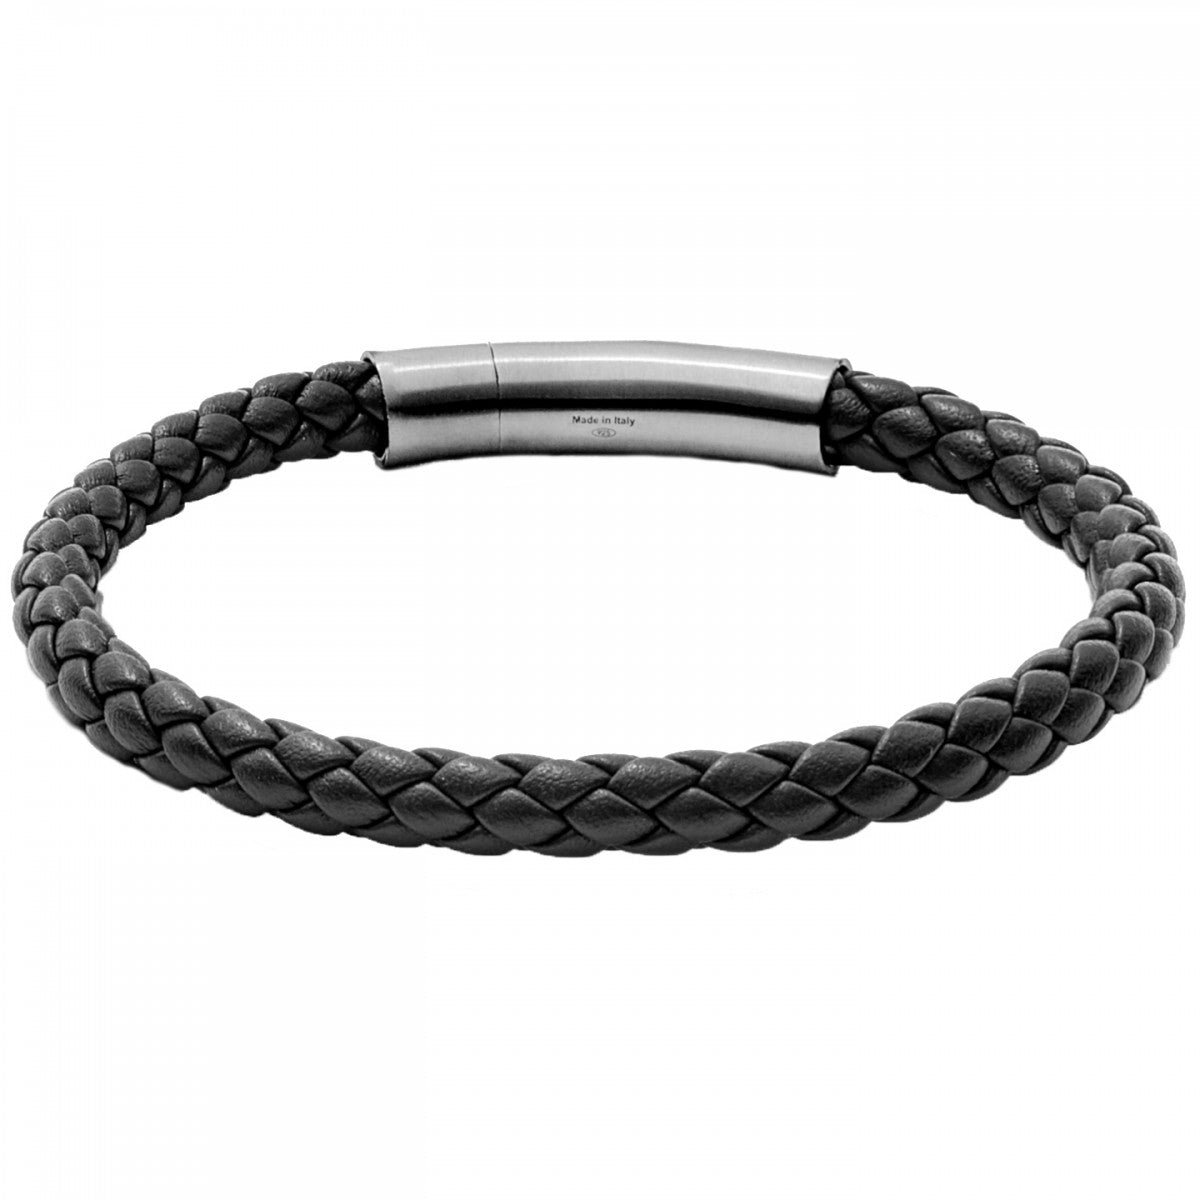 Tateossian Tubo Charles Taito Men's Leather and Silver Bracelet